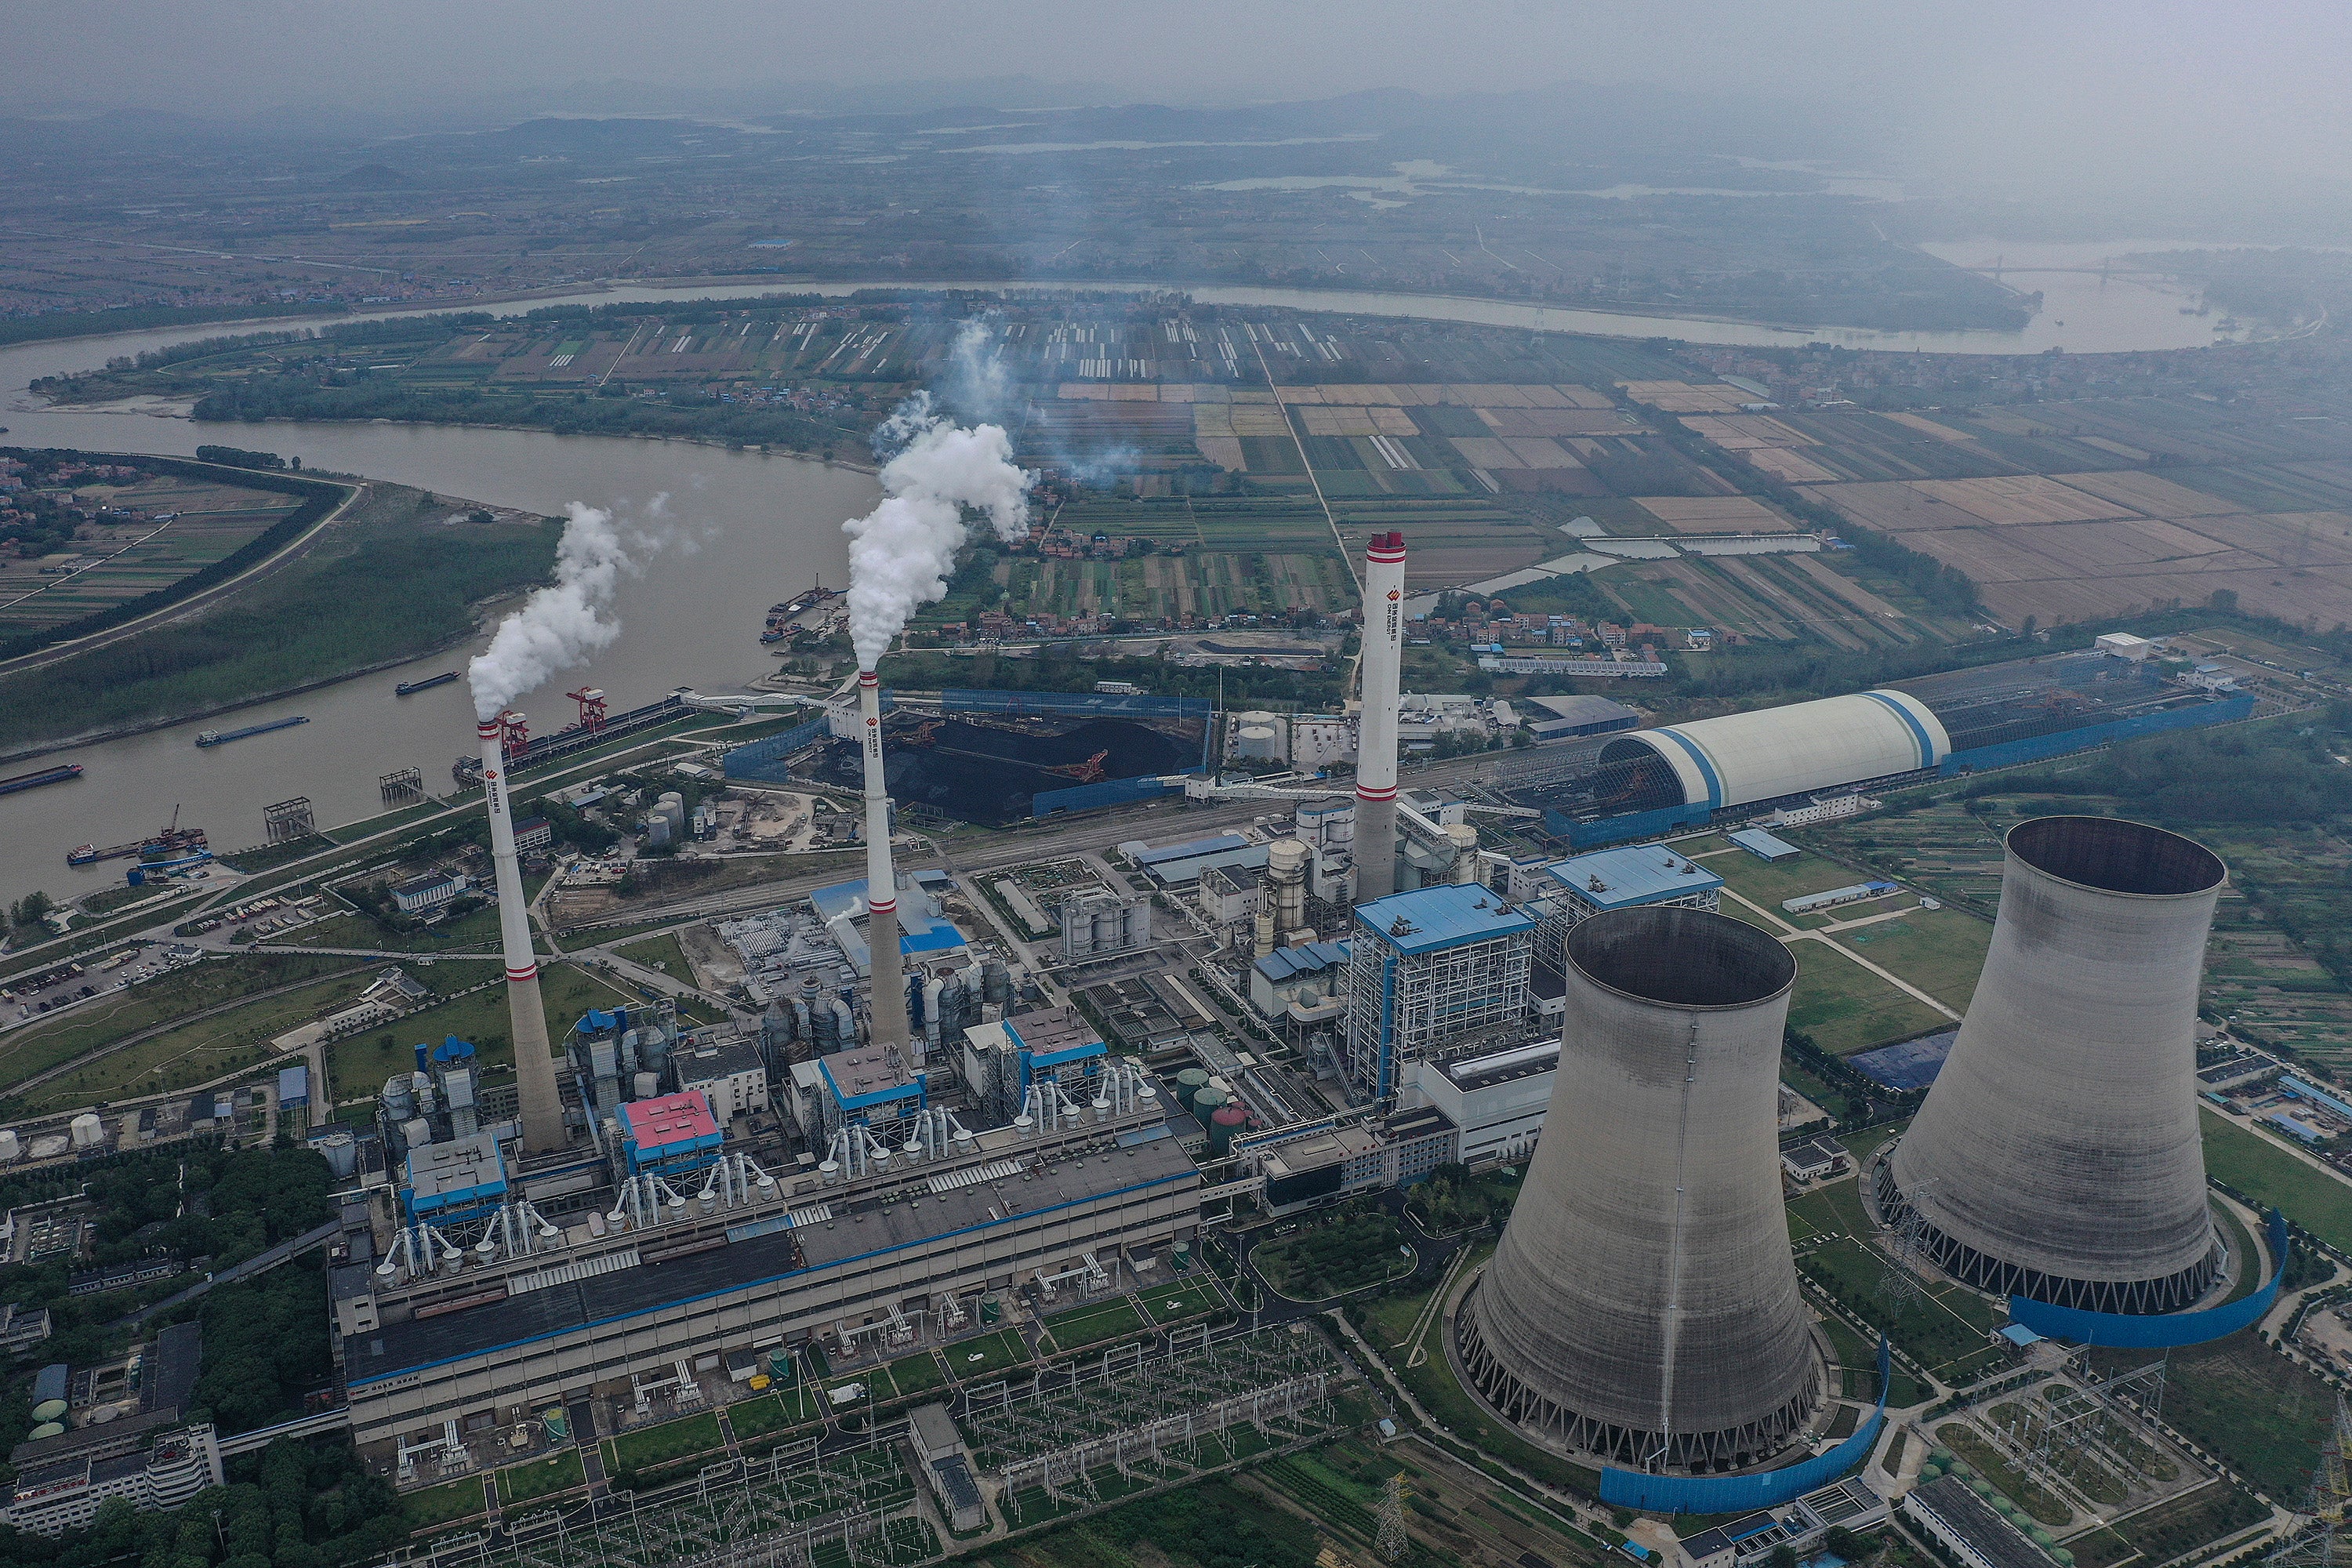 An aerial view of a coal fired power plant in Hanchuan, Hubei province, China, on 13 October